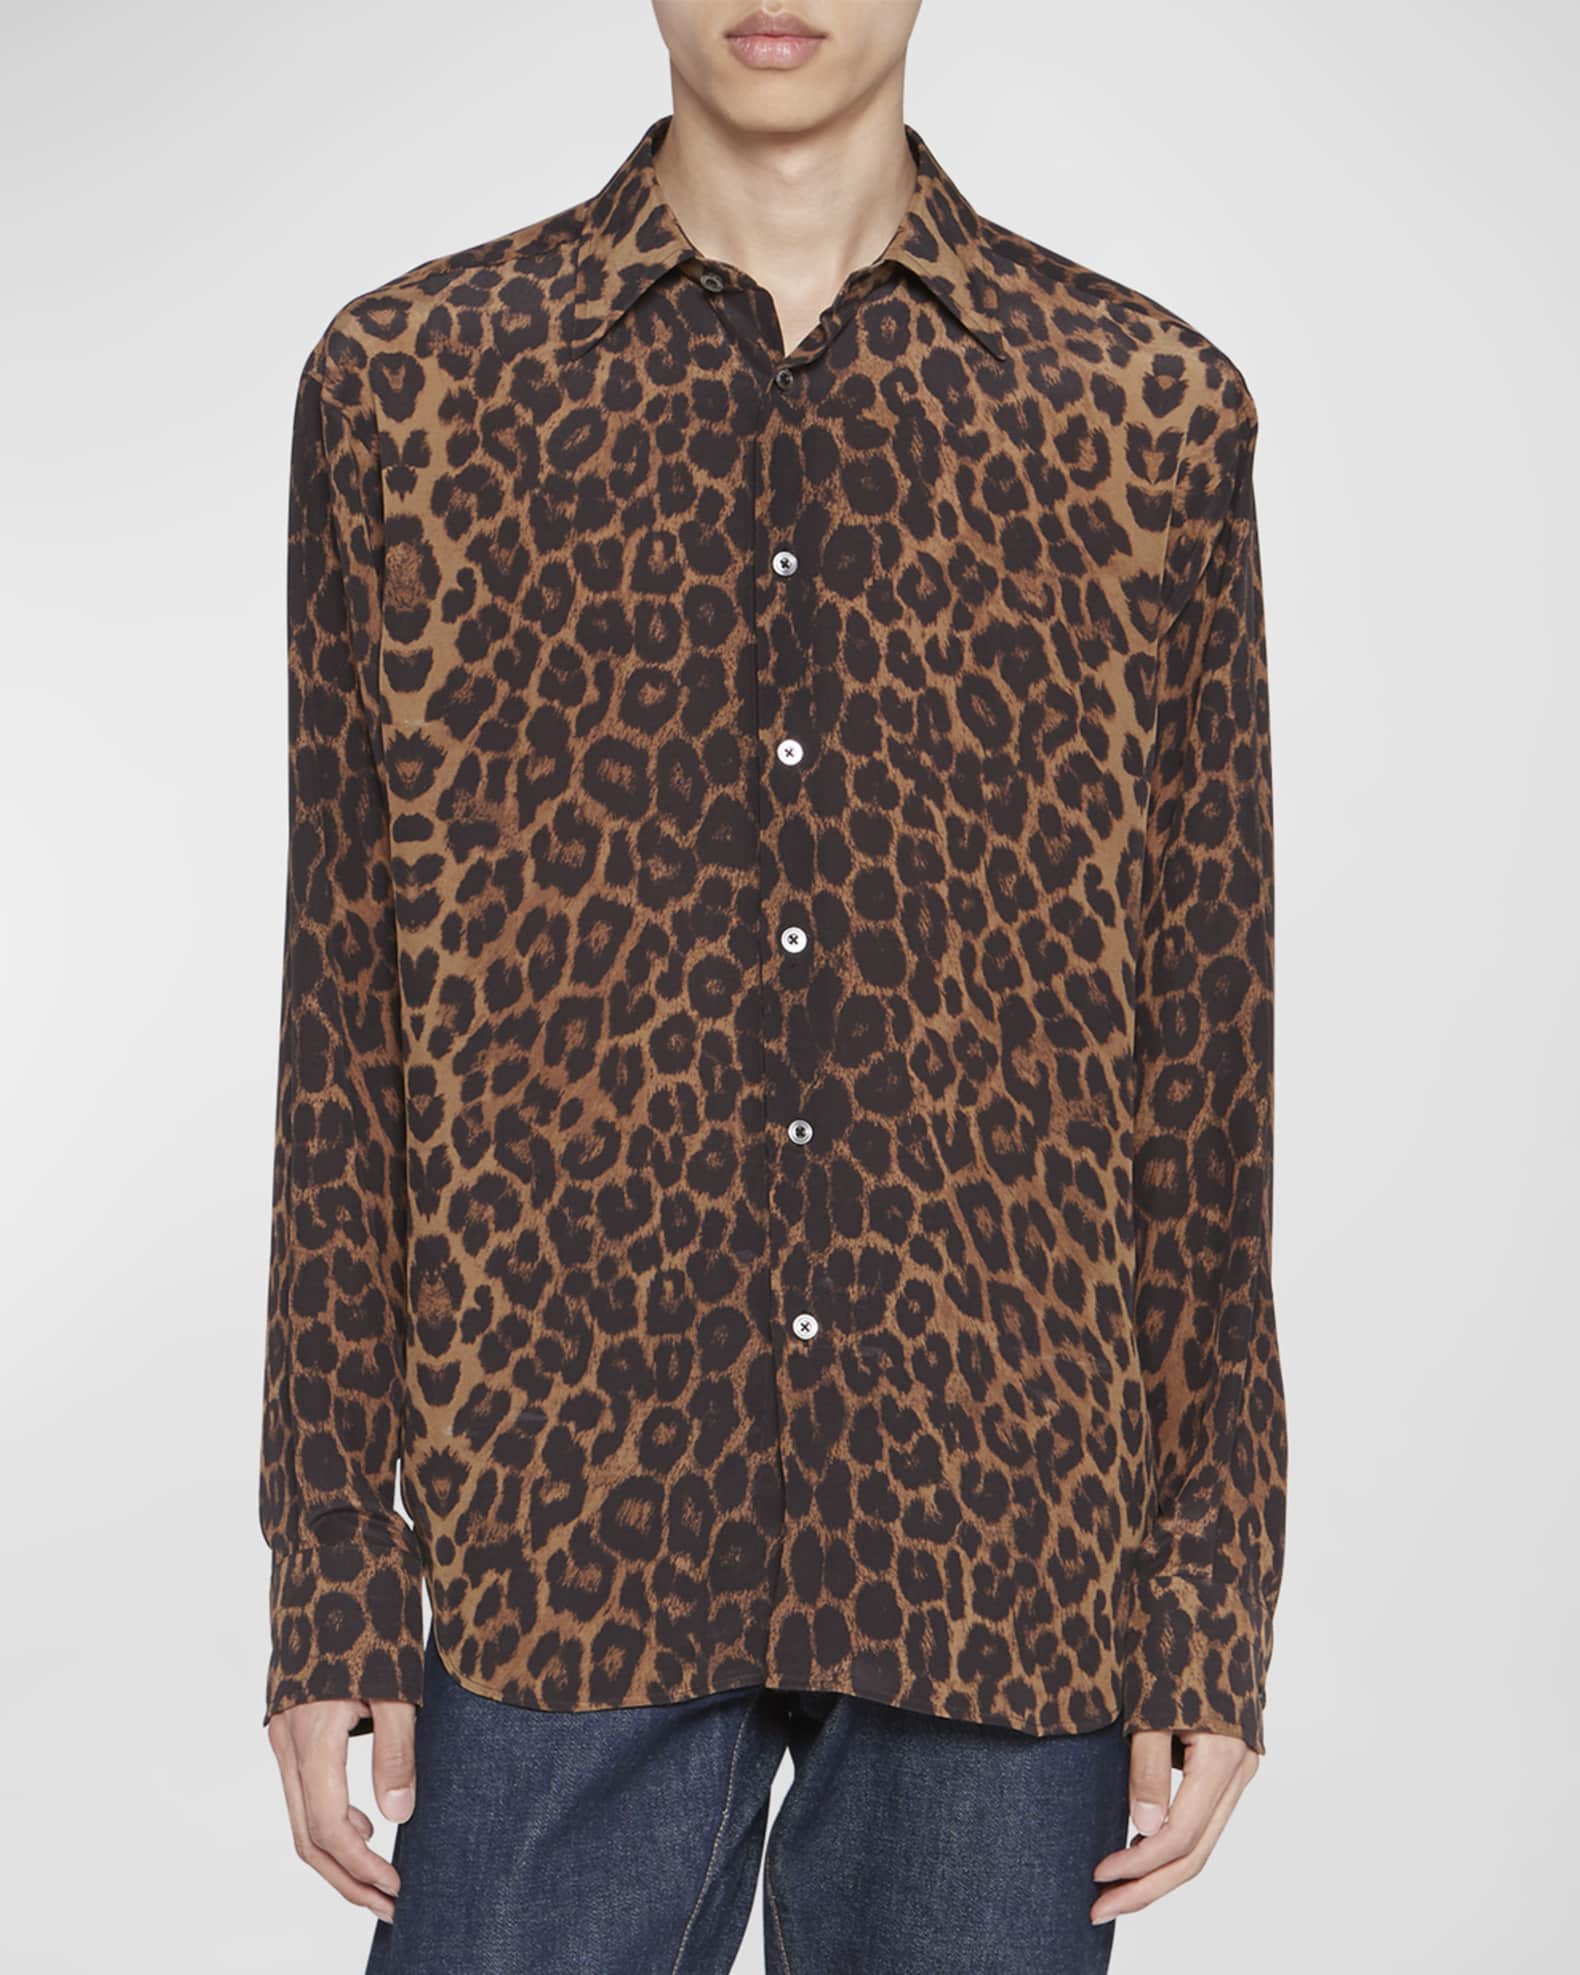 TOM FORD Men's Leopard-Print Relaxed Fit Sport Shirt | Neiman Marcus